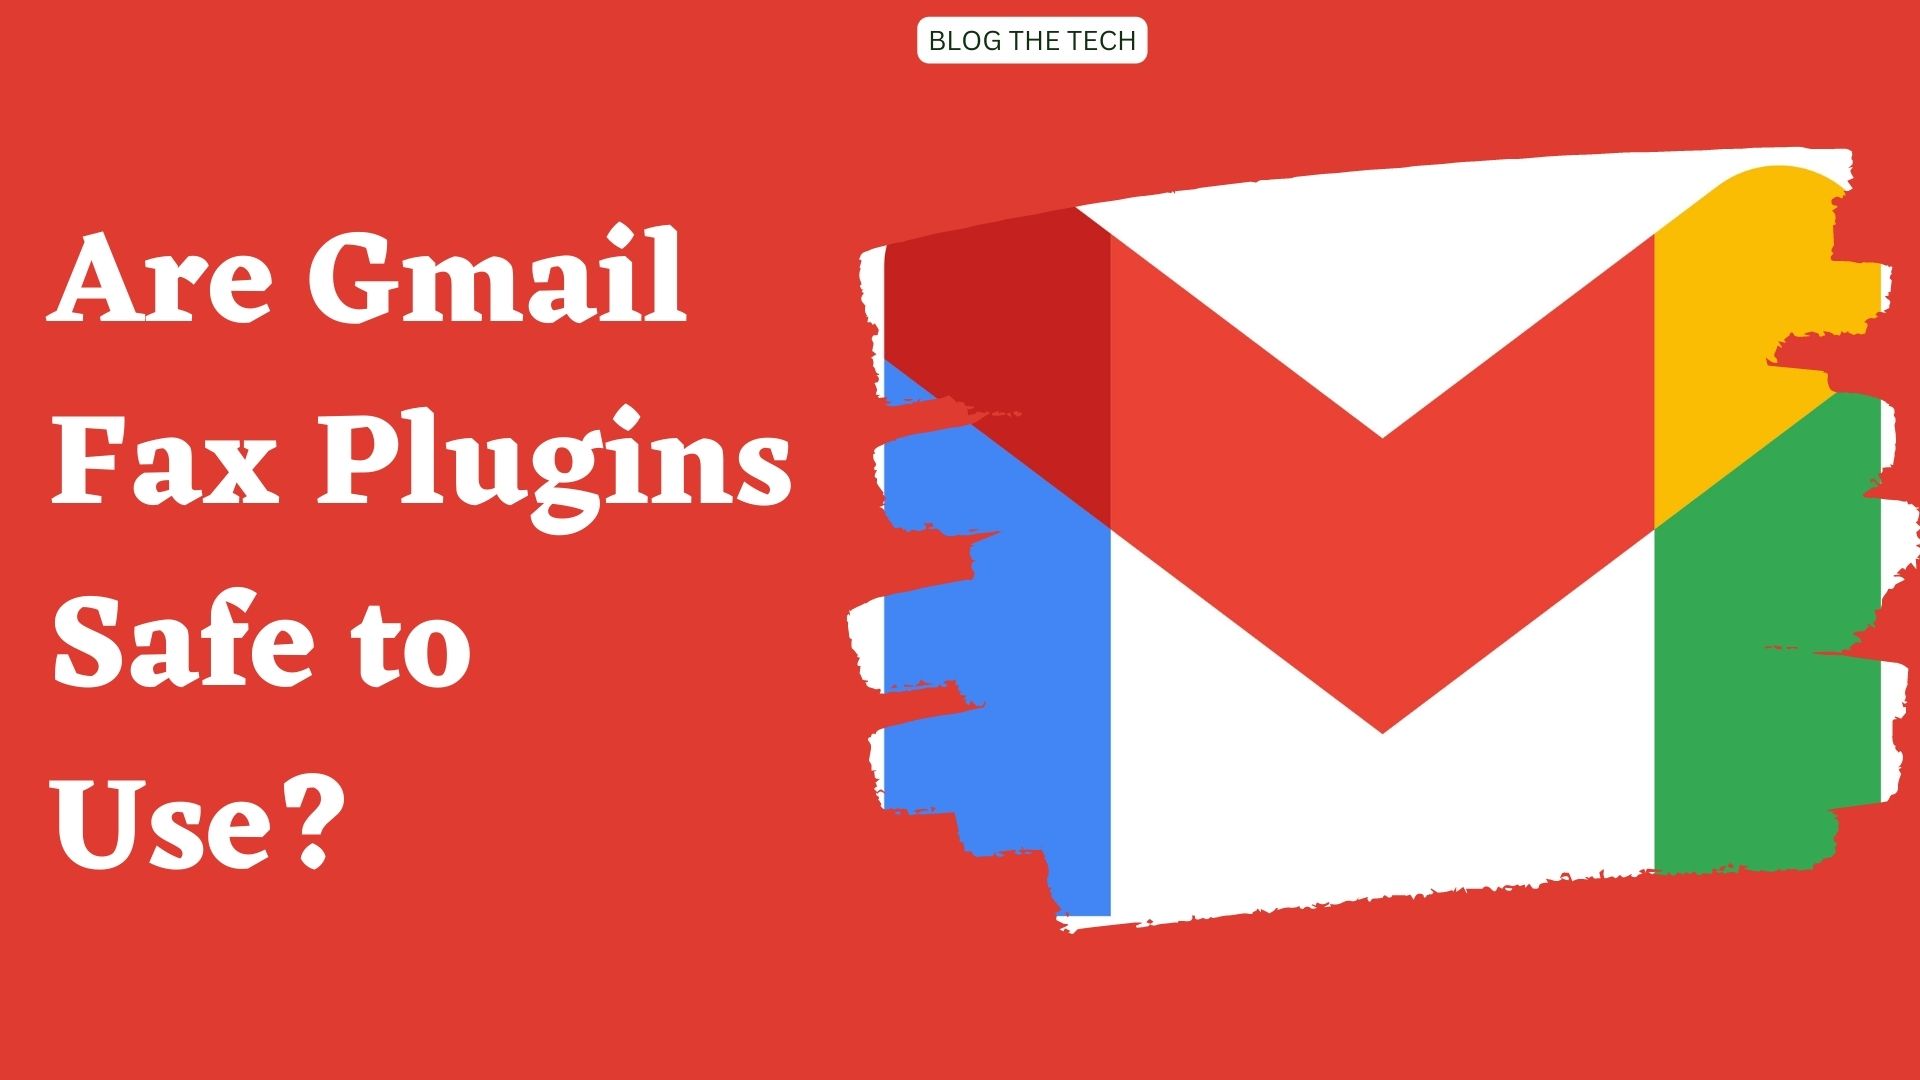 Are Gmail Fax Plugins Safe to Use?